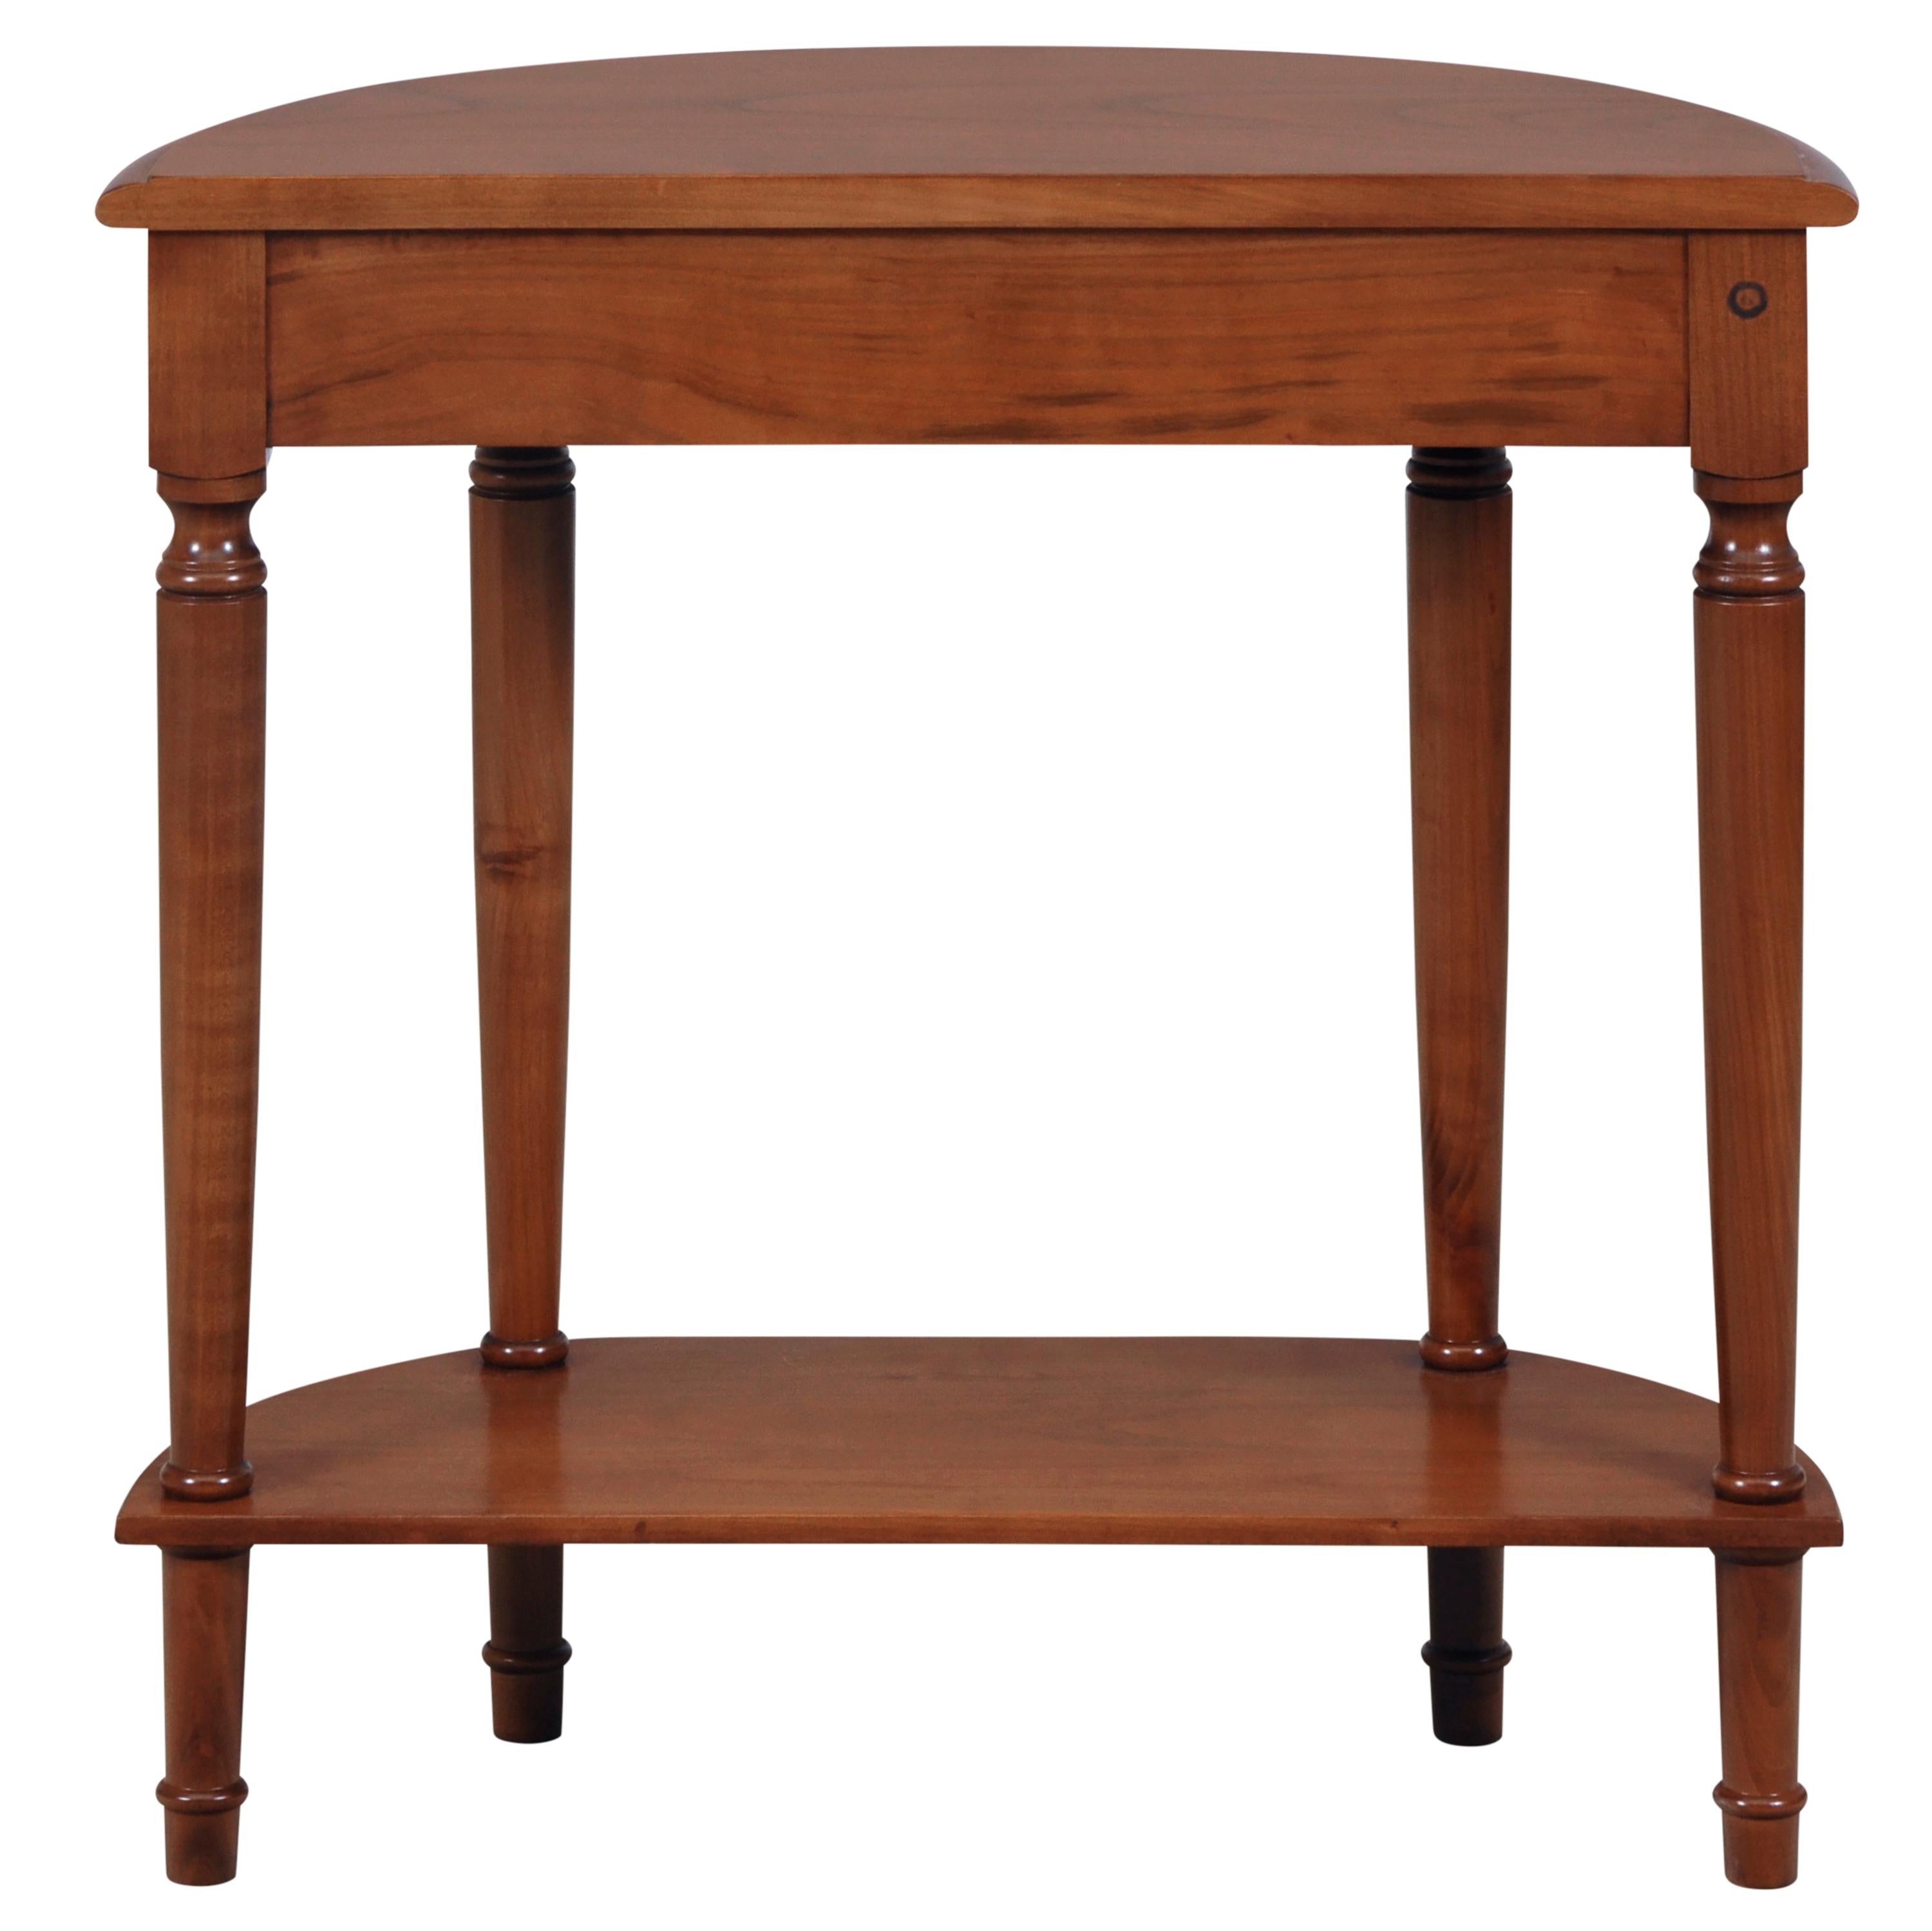 French Louis Philippe Style Half-Moon Console Table in Cherry, Secret Drawer, Shelf For Sale